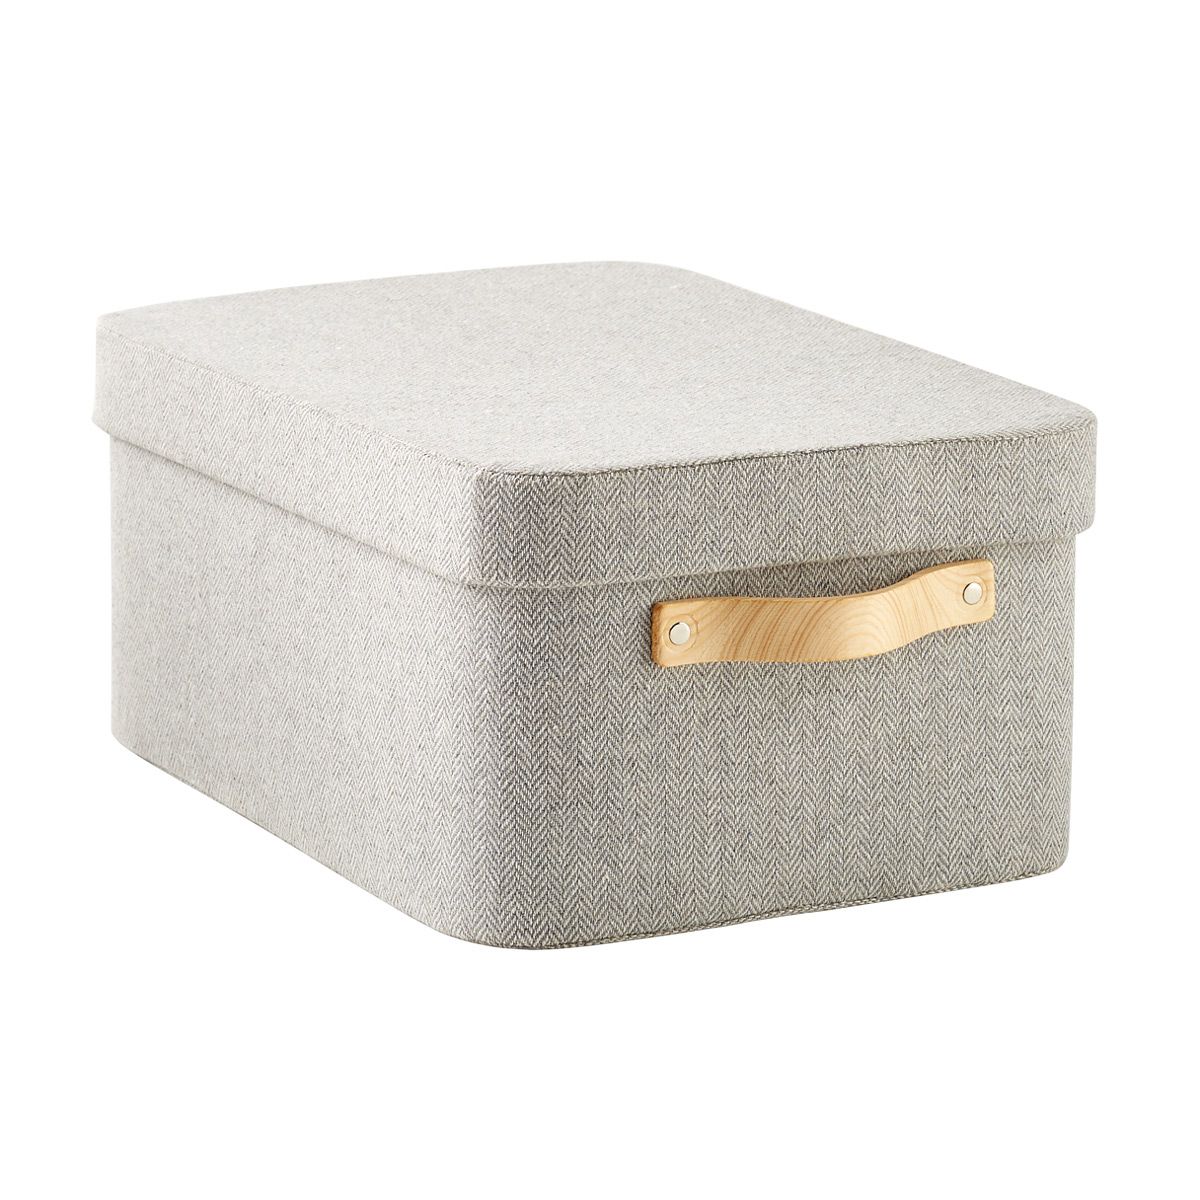 Herringbone Storage Boxes with Wooden Handles | The Container Store